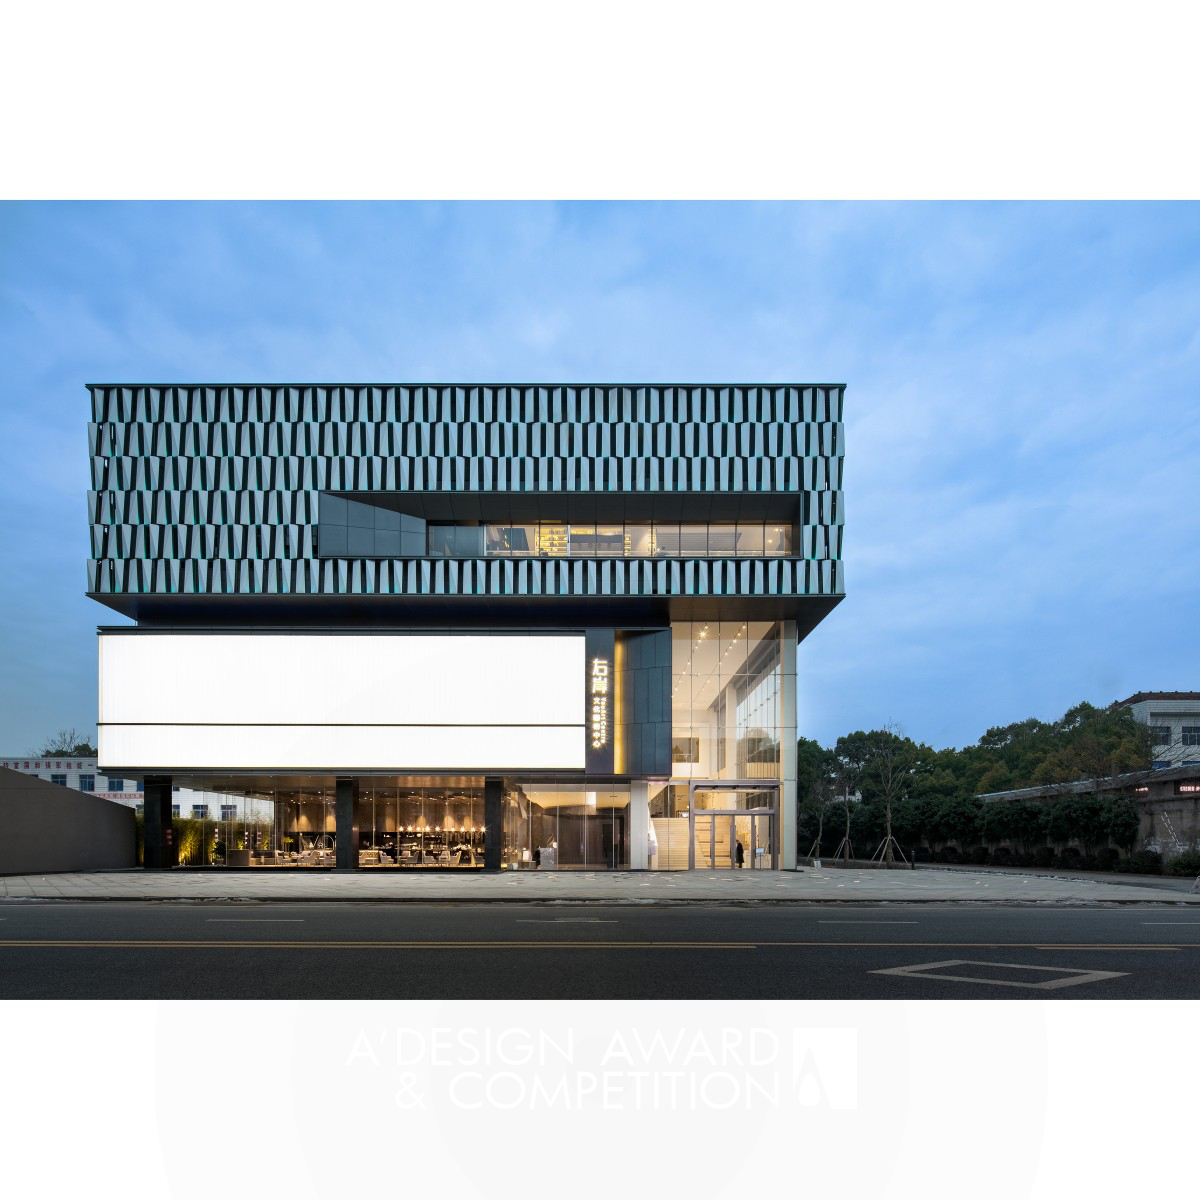 Changde YouArt Centre exhibition space by Atelier Global Limited